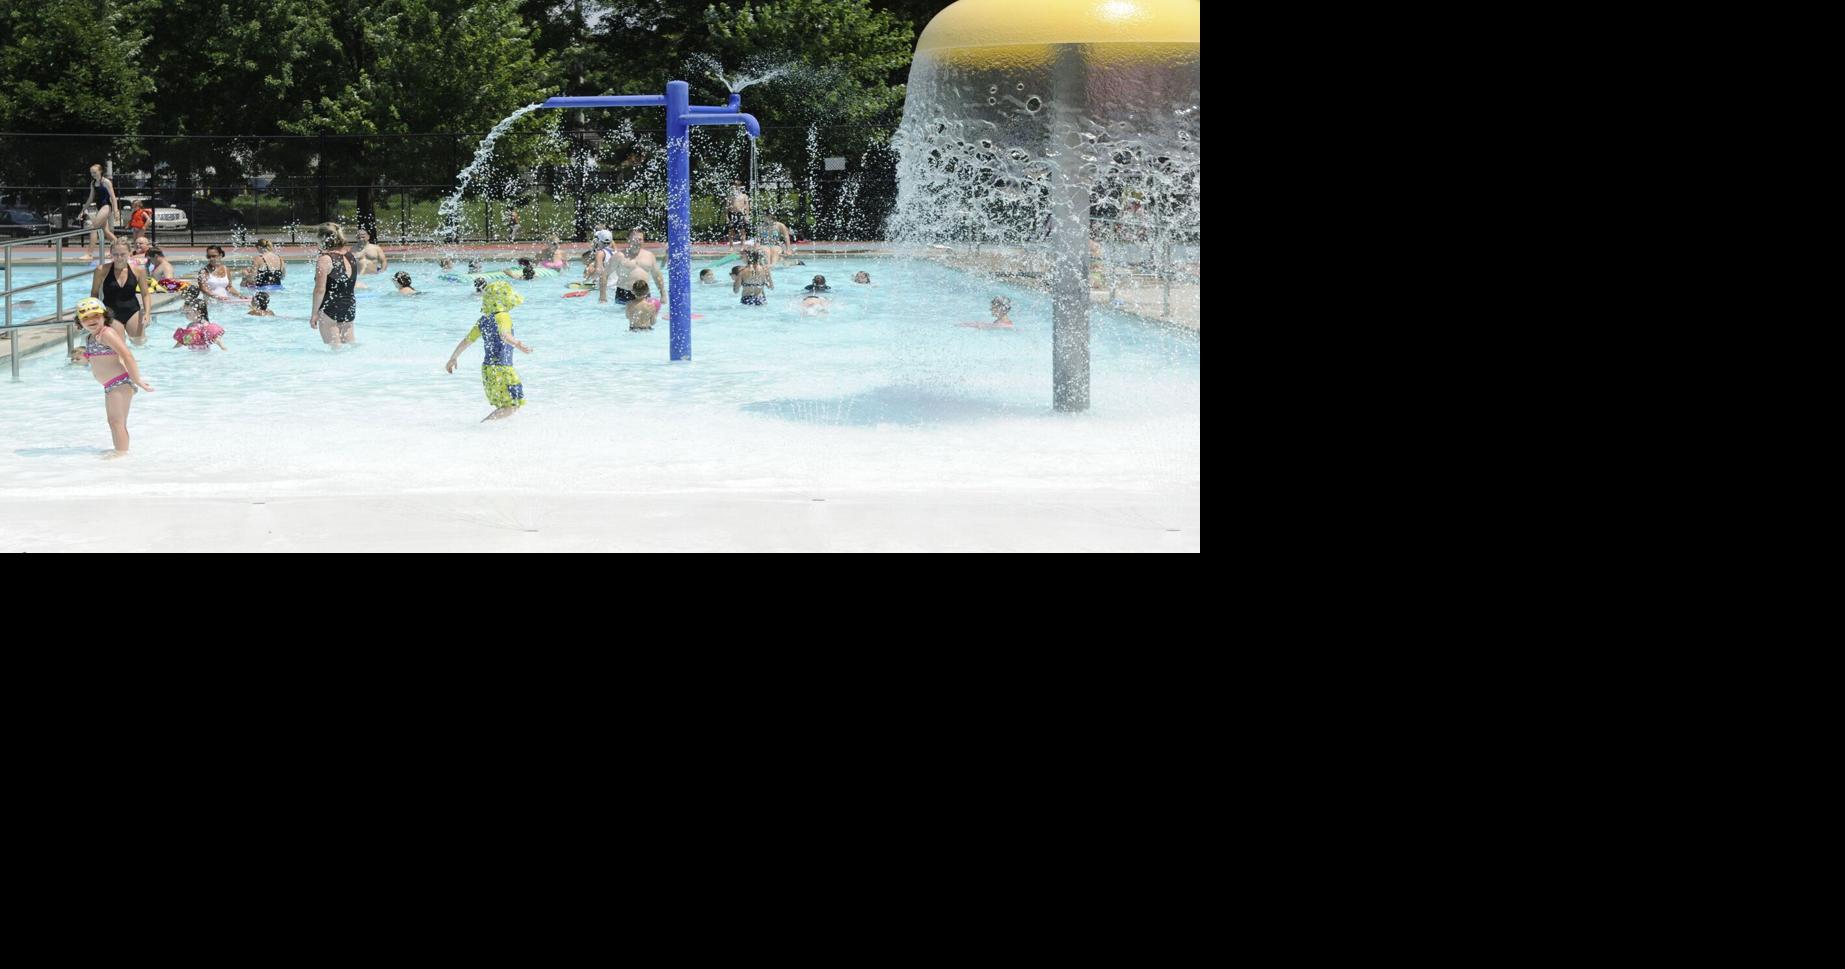 Pools, splash pads in Oakville remain open during heat wave